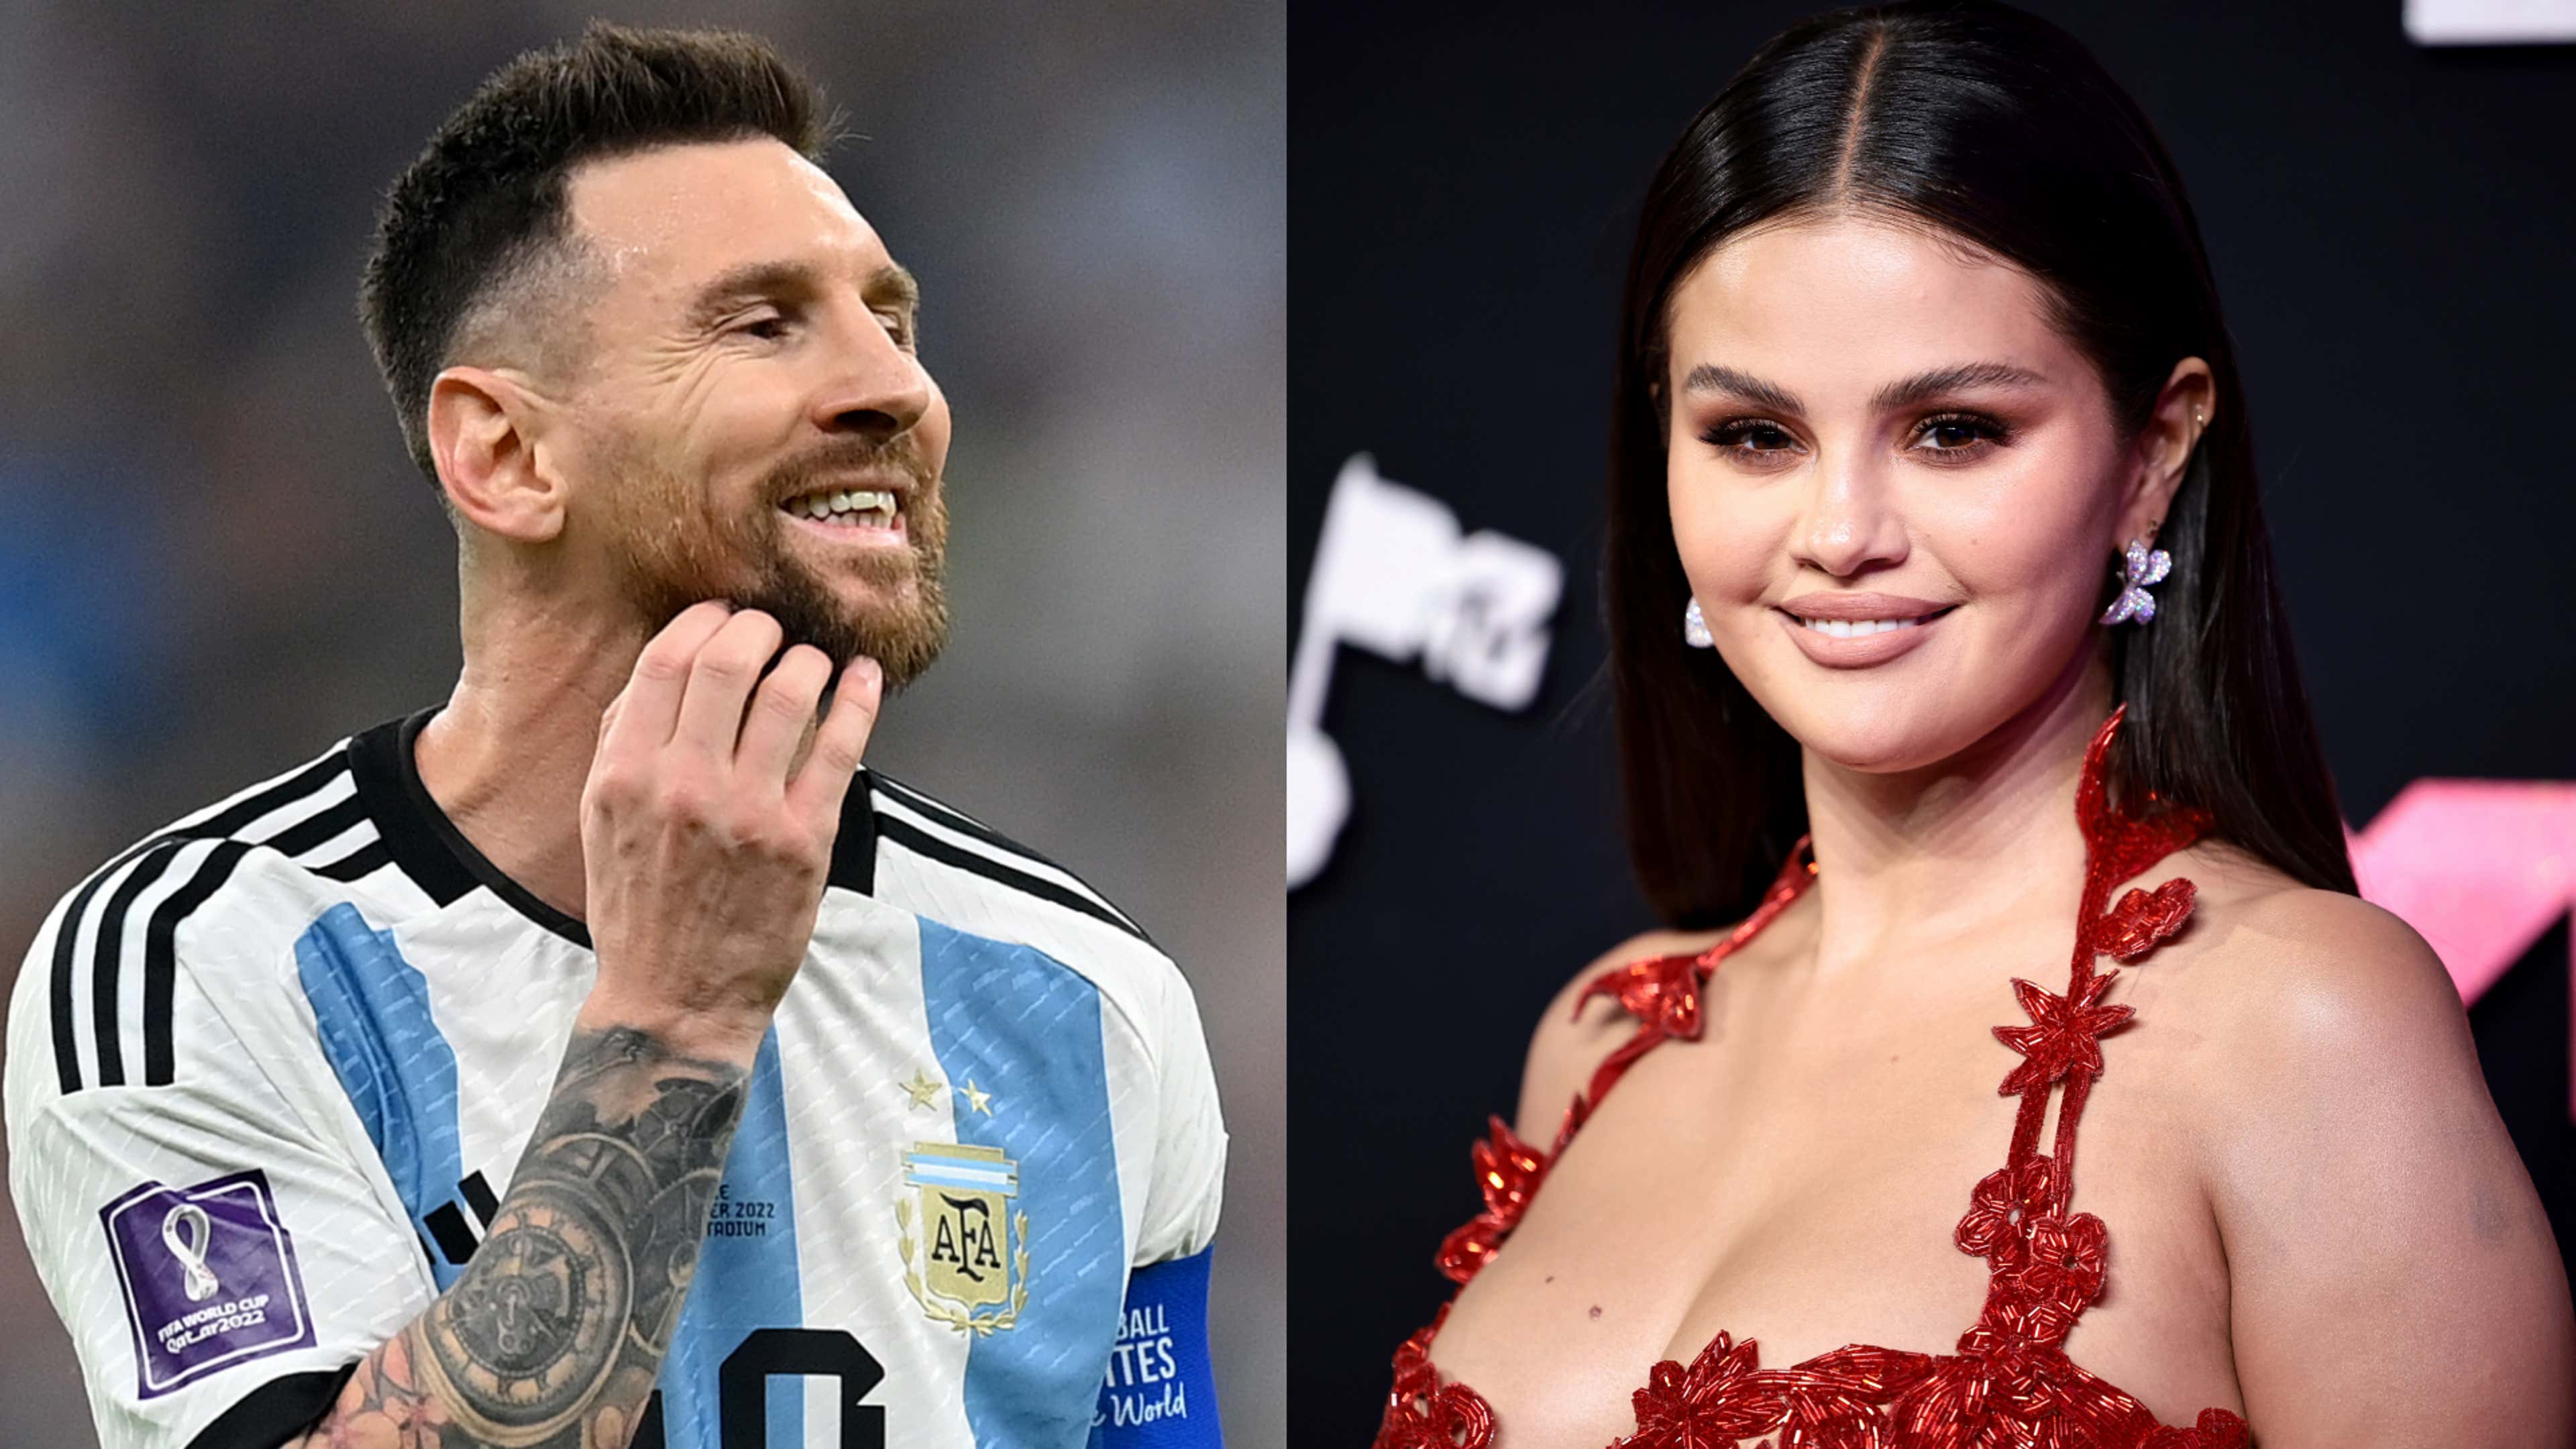 Lionel Messi shirt sales sky rocket as adidas sell out worldwide of  Argentina strips with his name on ahead of World Cup final against France